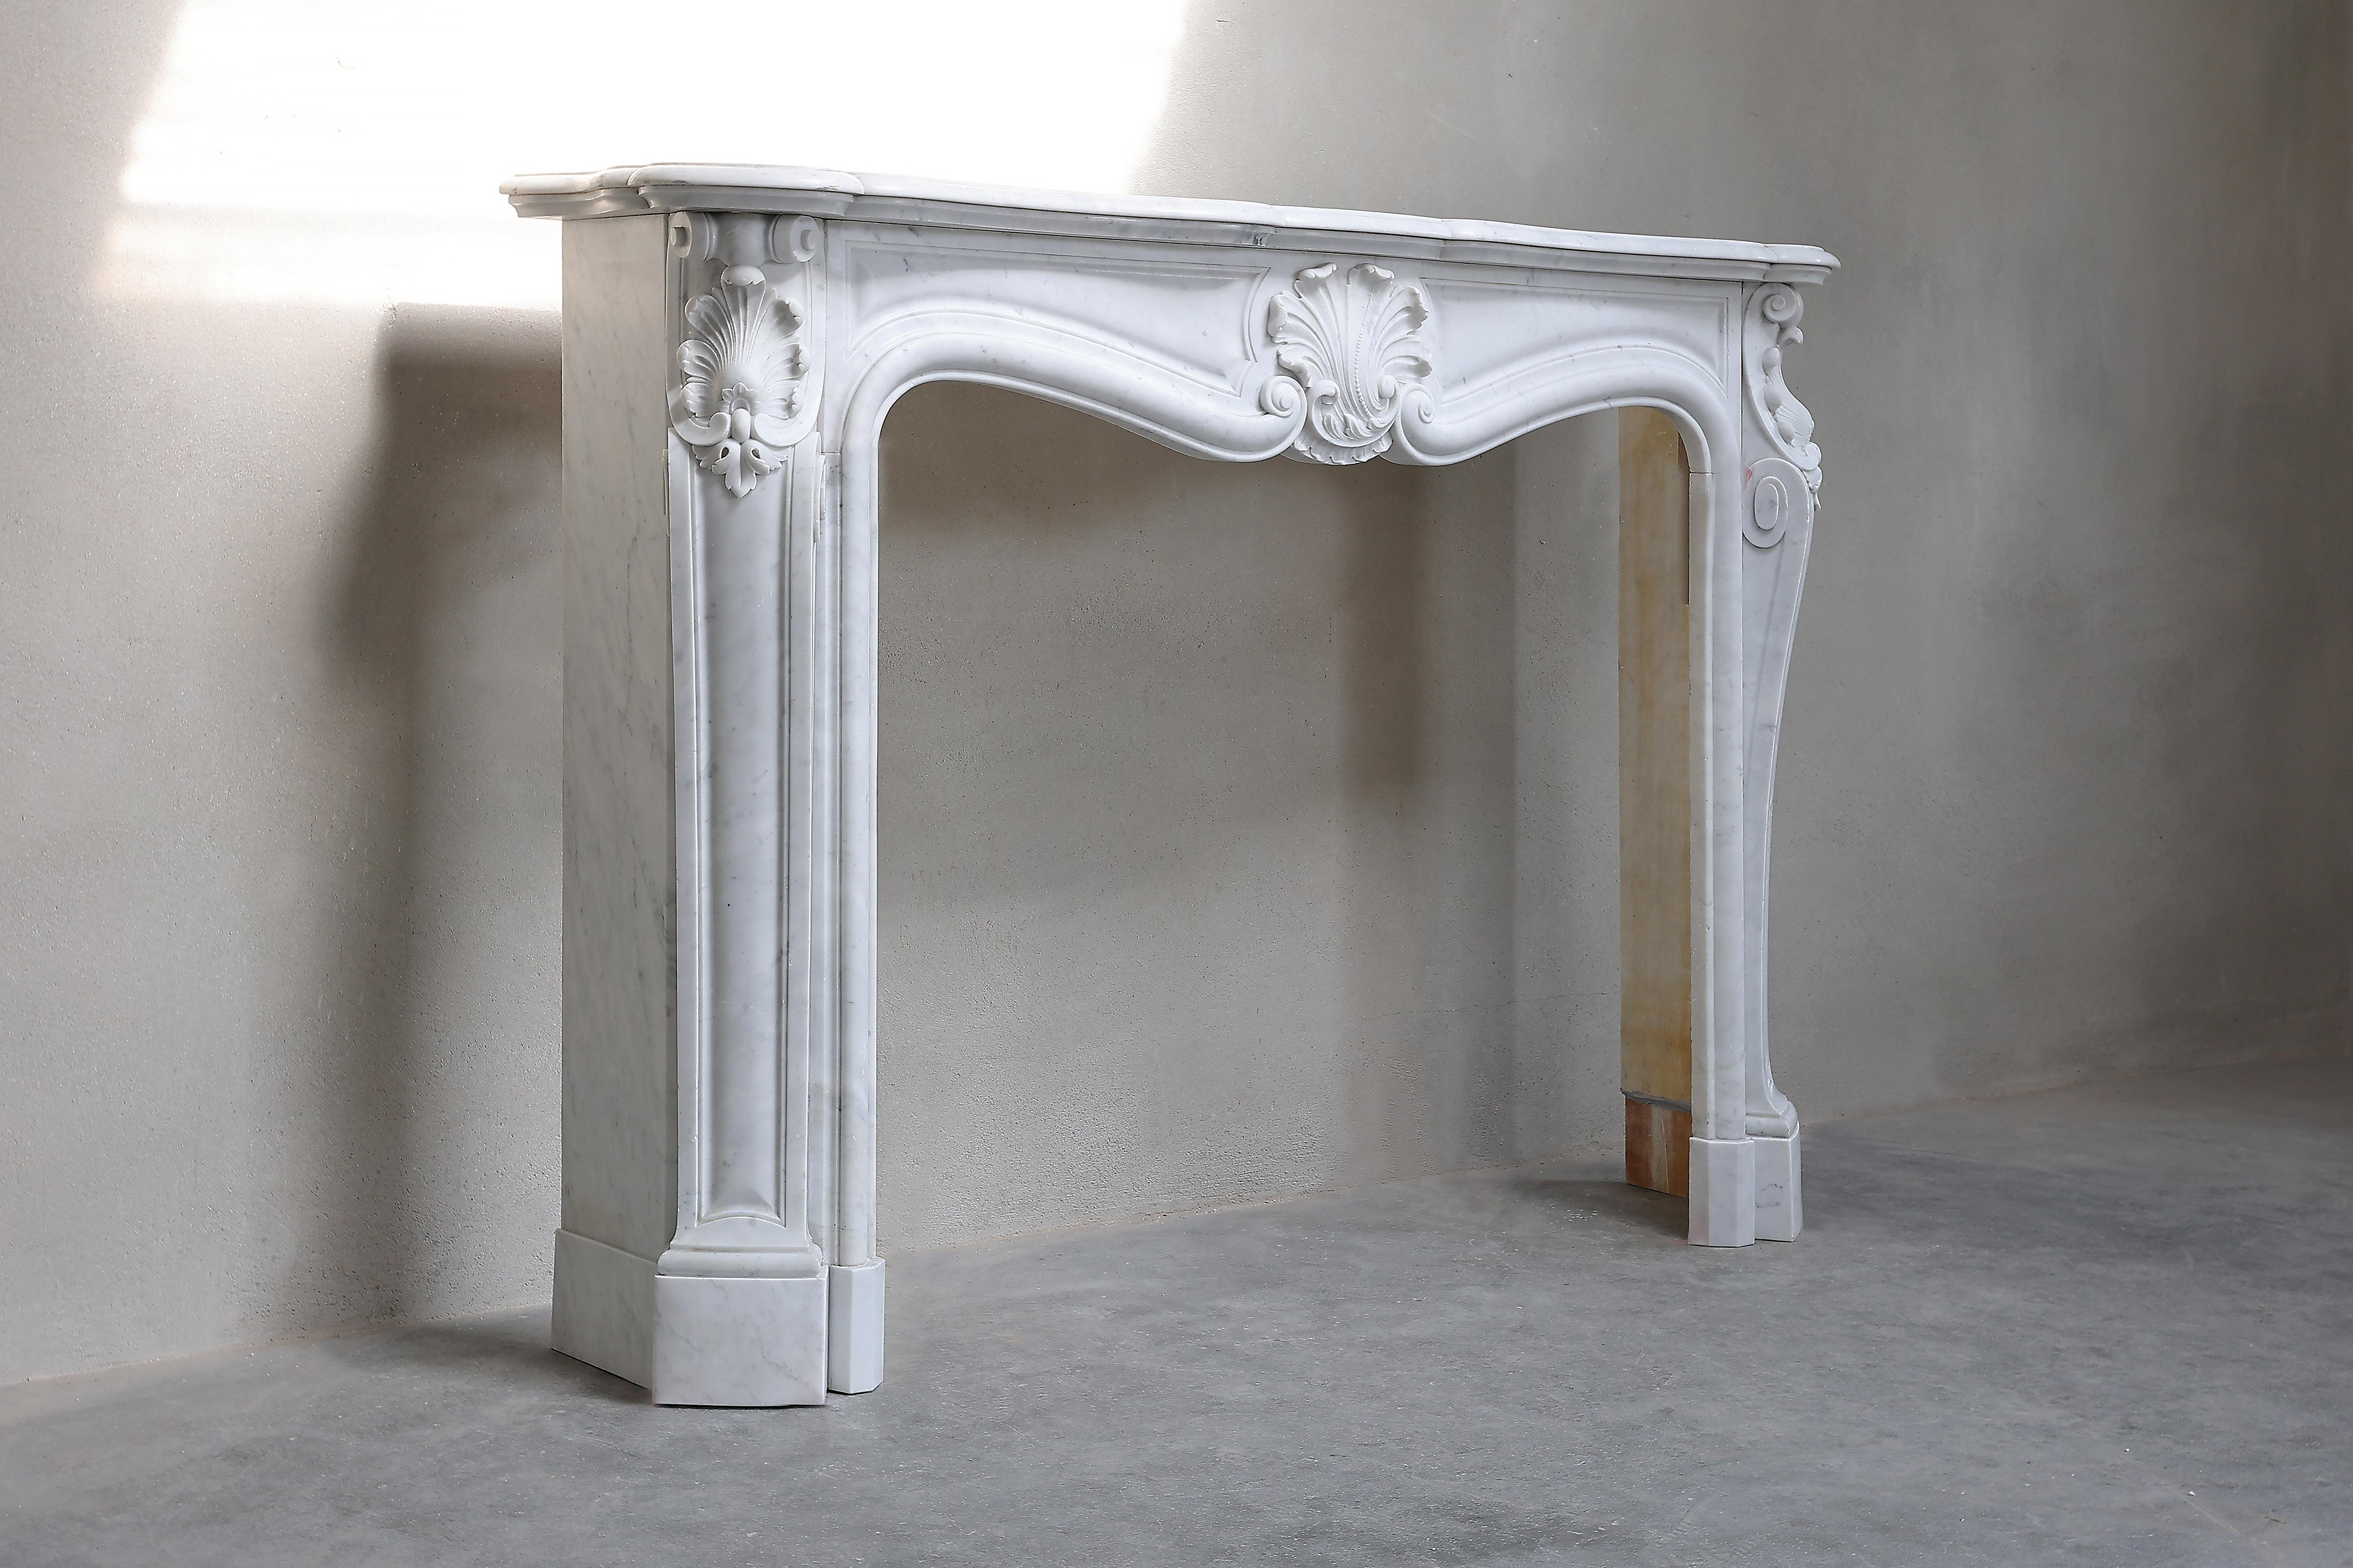 Beautiful antique fireplace of white Carrara marble from the 19th century. The fireplace is in Louis XV style and has a scallop in the middle and on the sides, also called 'trois scallops'. This fireplace dates from the 19th century and has an